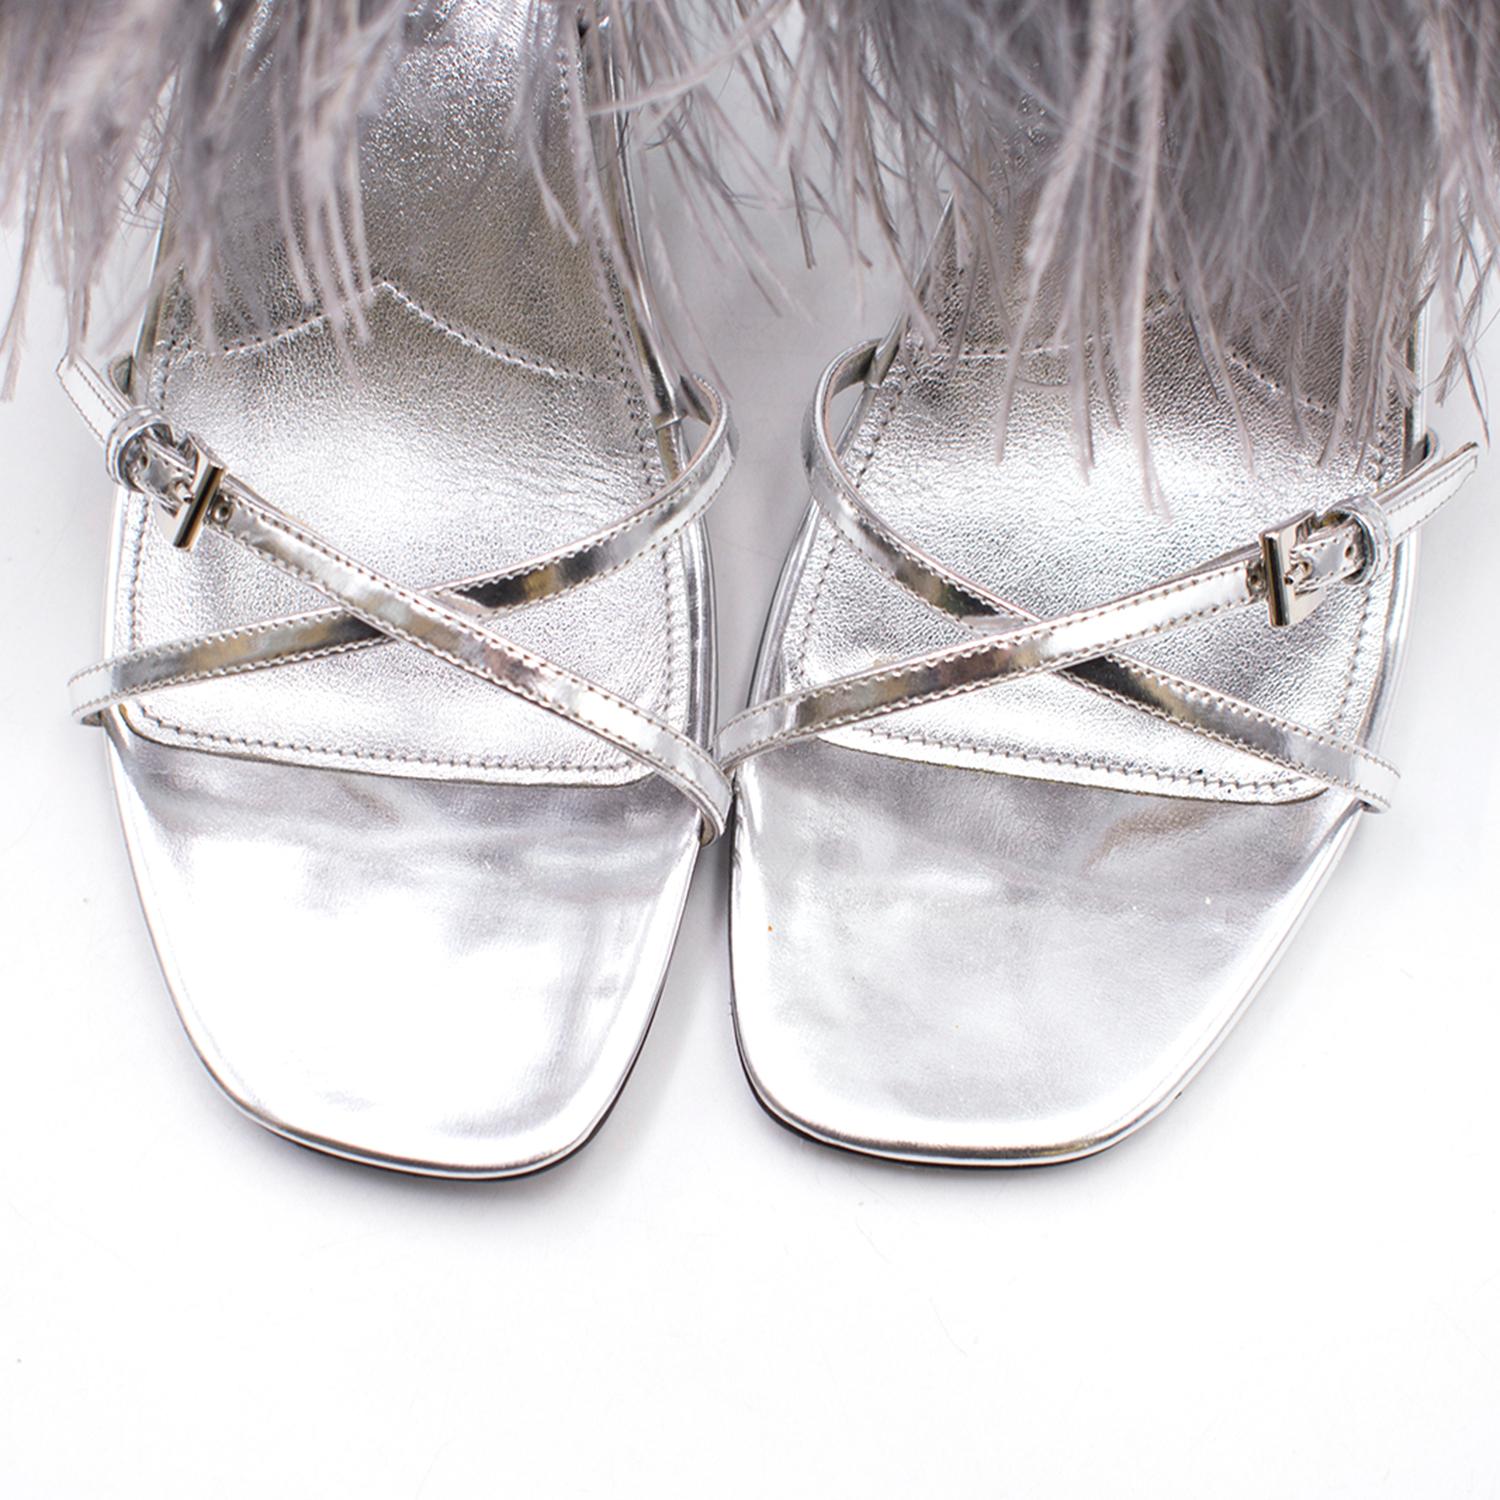 suede one-strap sandals with feathers